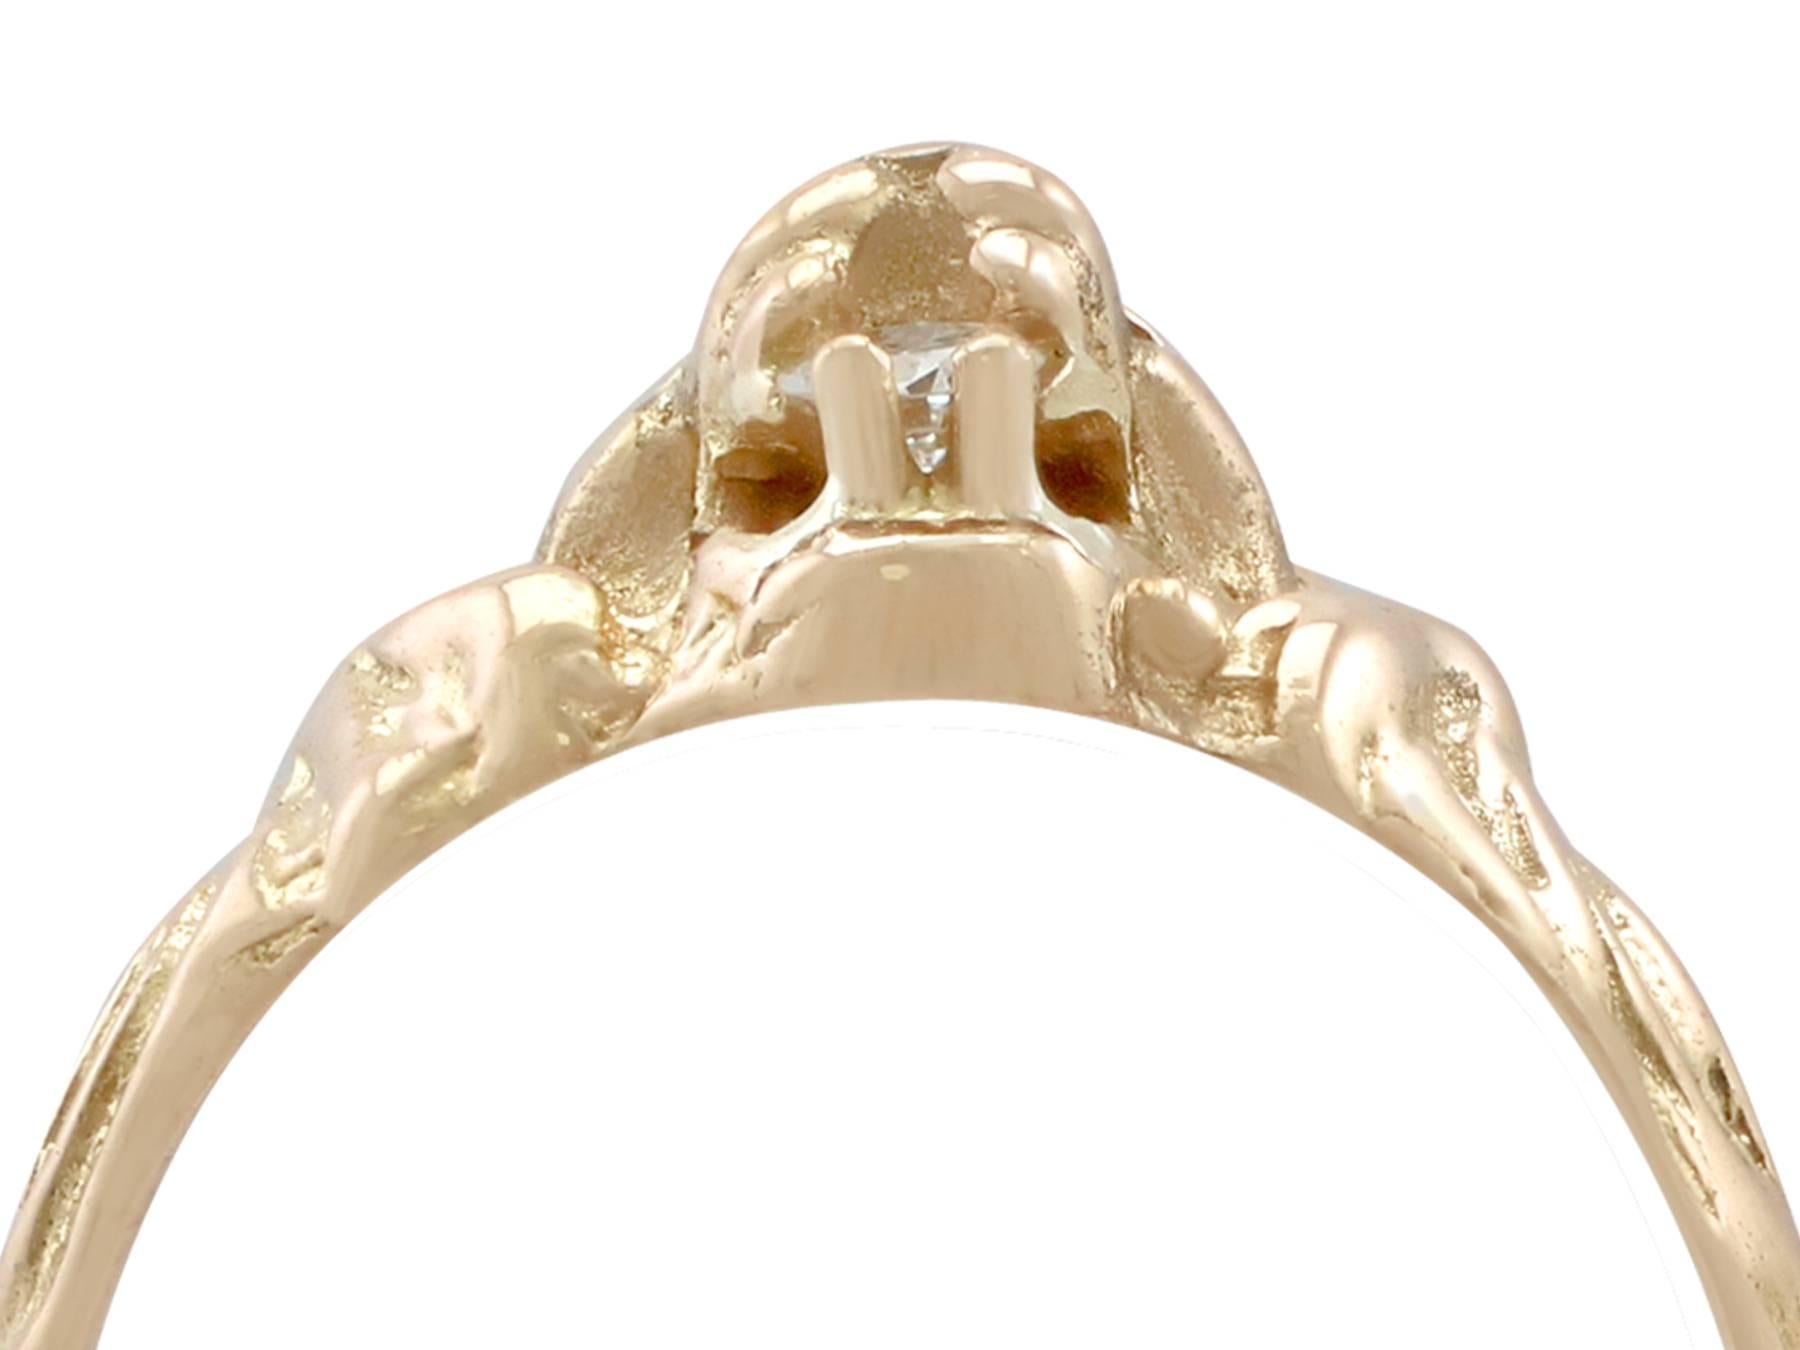 An impressive vintage Chinese 0.08 carat diamond and 18 carat yellow gold 'lion' ring; part of our diverse gent's jewellery and estate jewelry collections.

This fine and impressive diamond ring has been crafted in 18ct yellow gold.

This 18ct gold